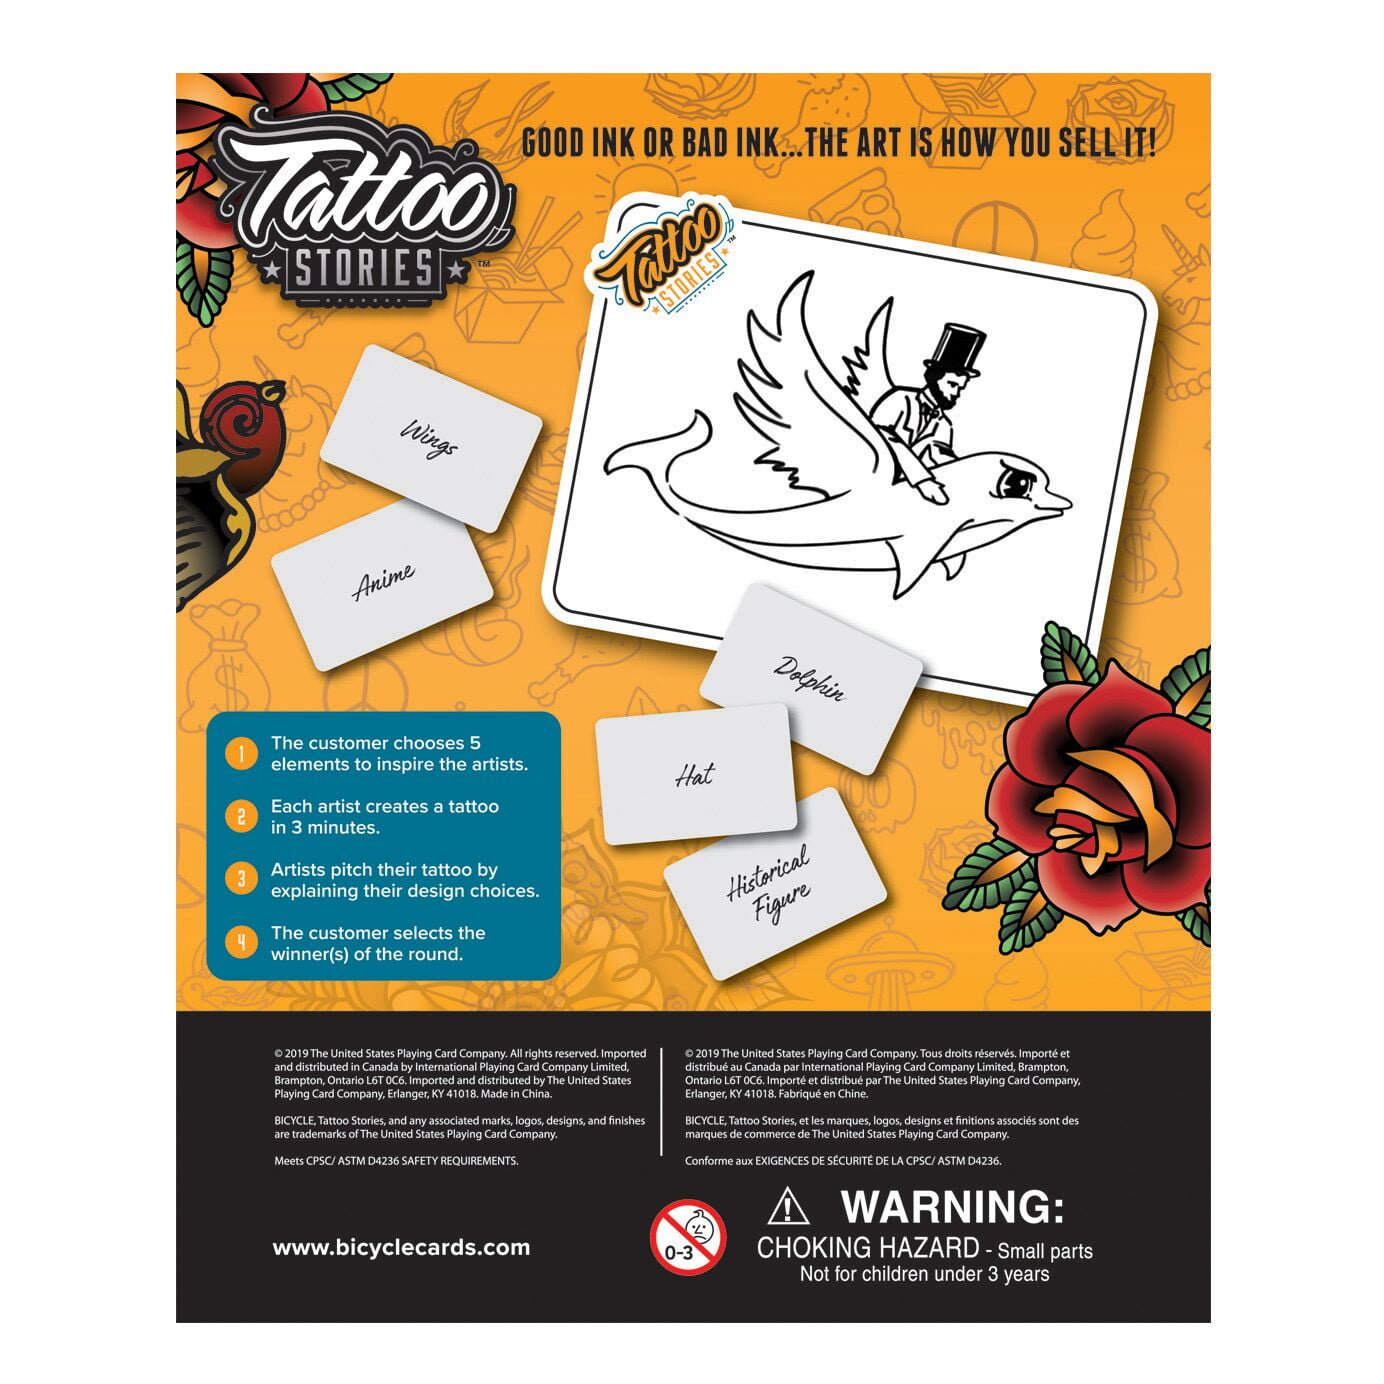 Tattoo Stories Bicycle 2019 Party Card Art Game for sale online